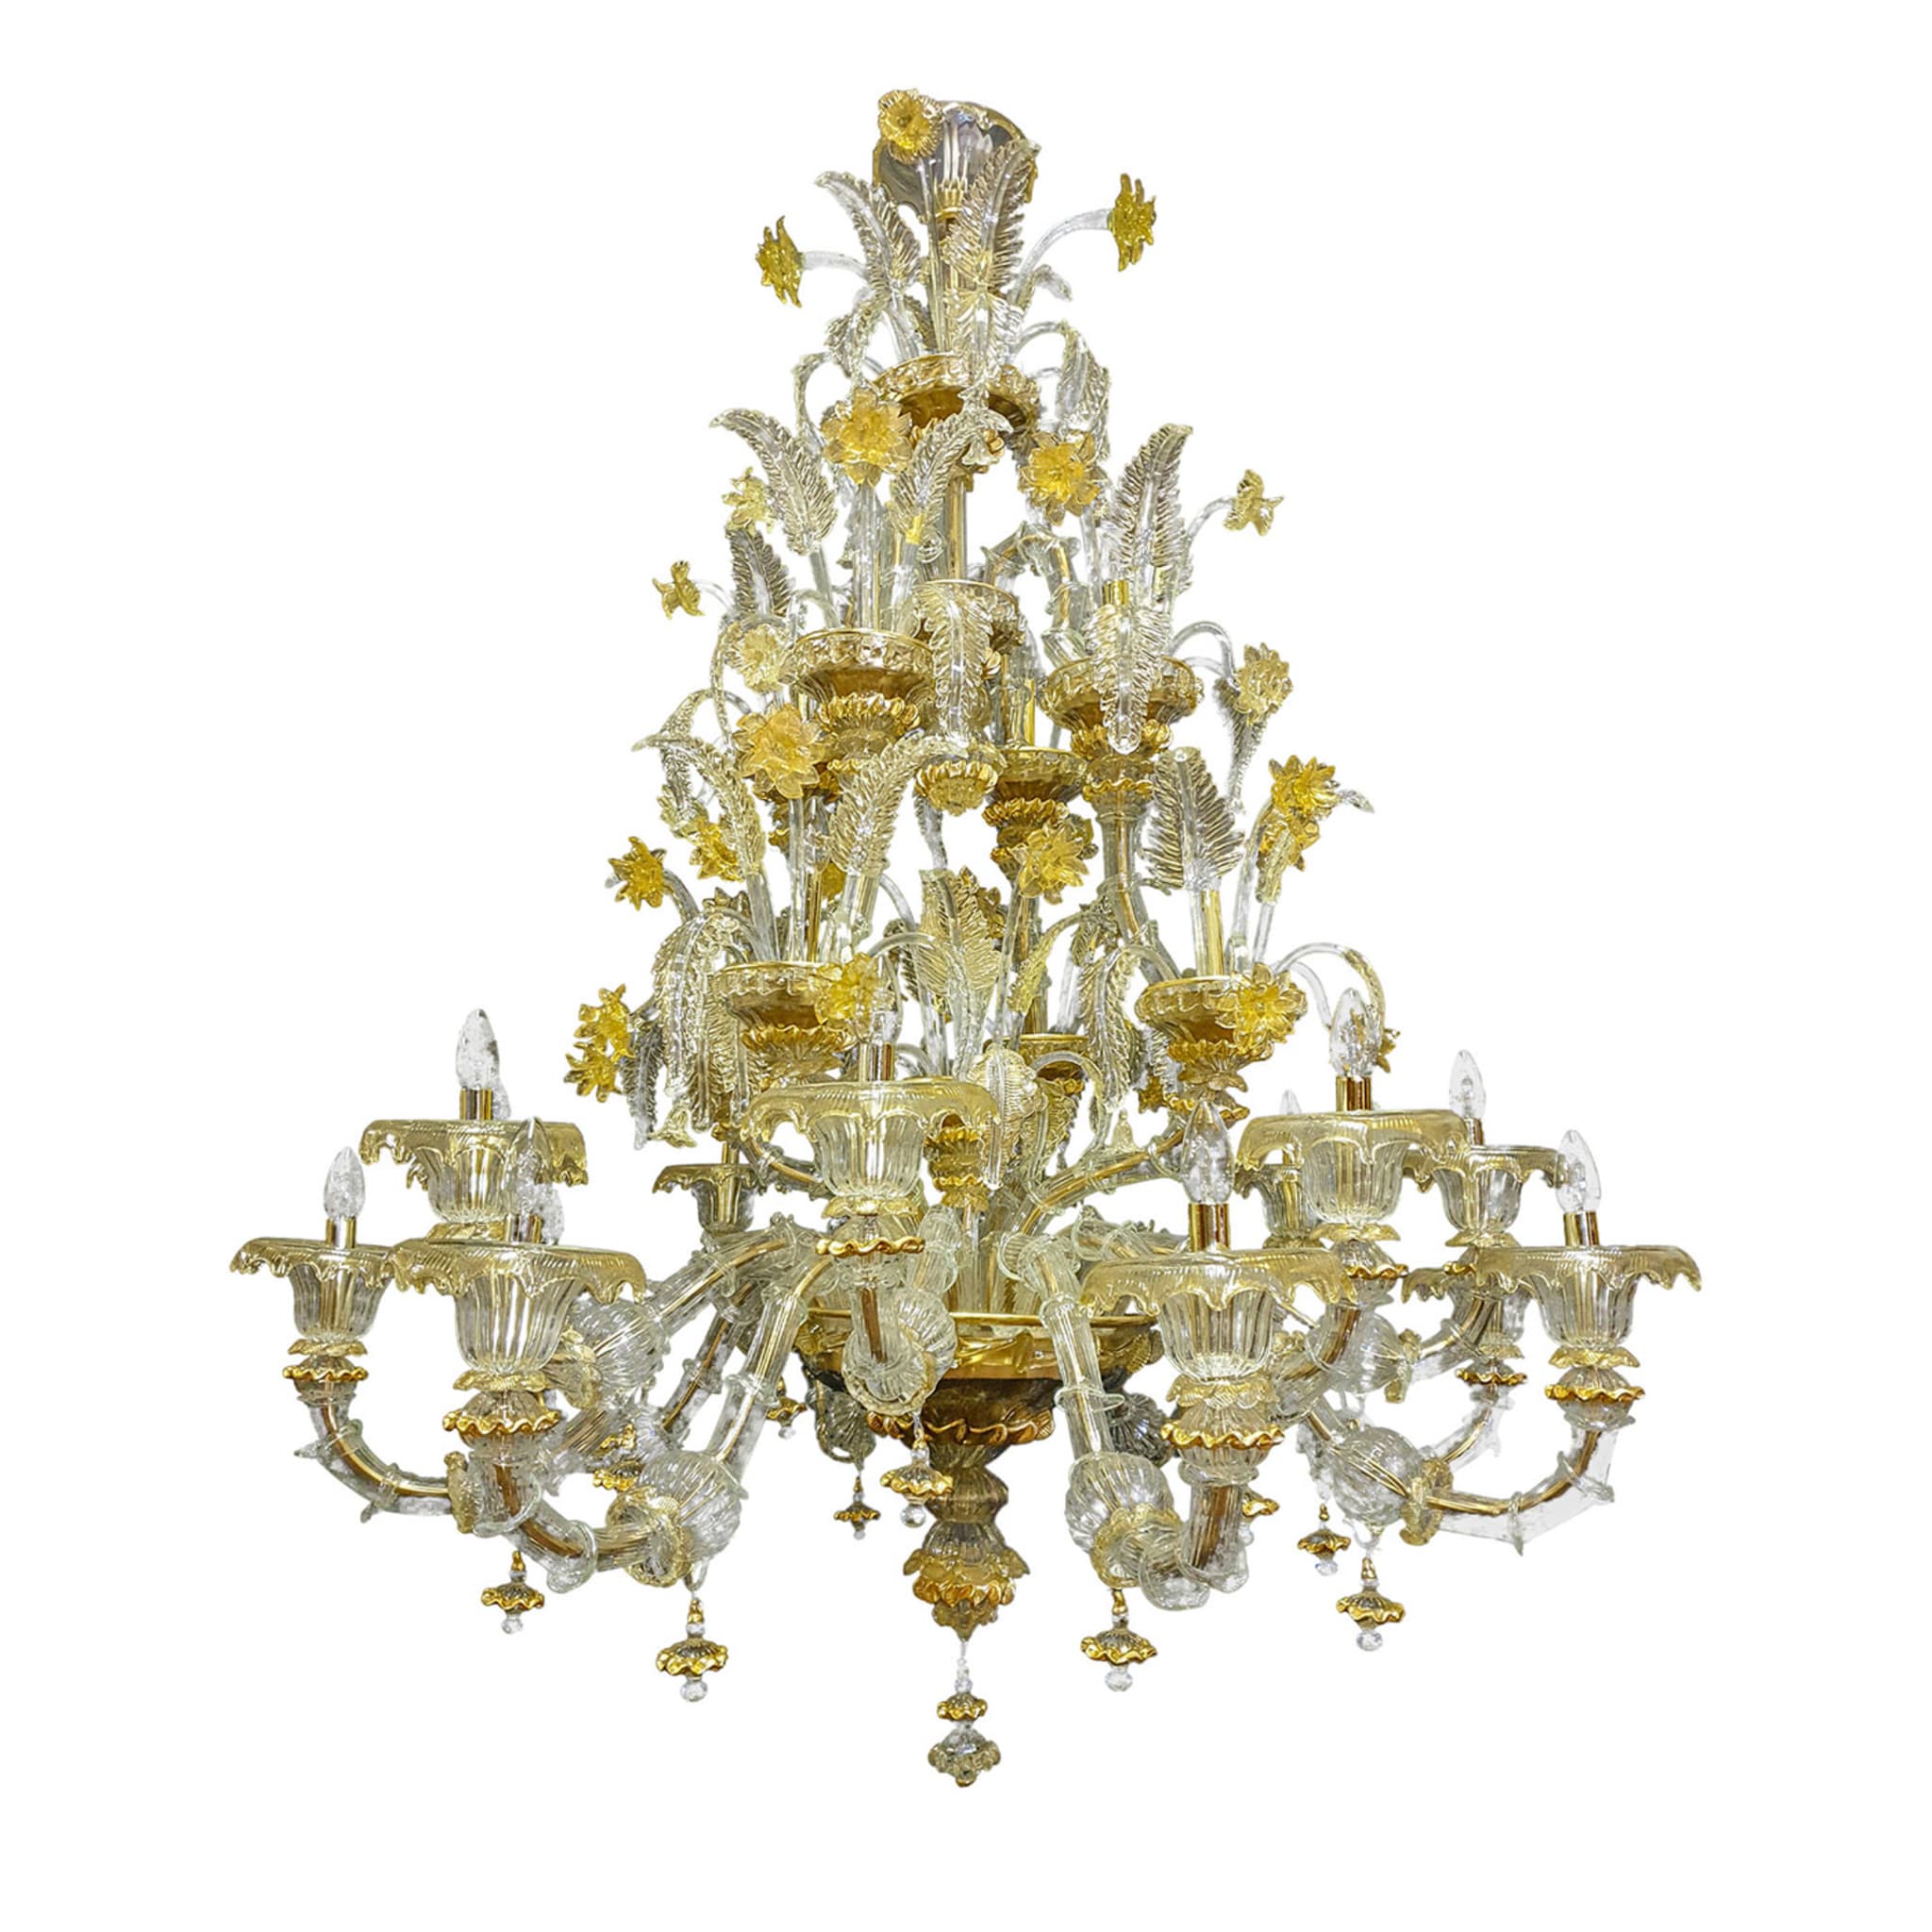 Rezzonico-style Gold and Crystal Chandelier #3 - Main view